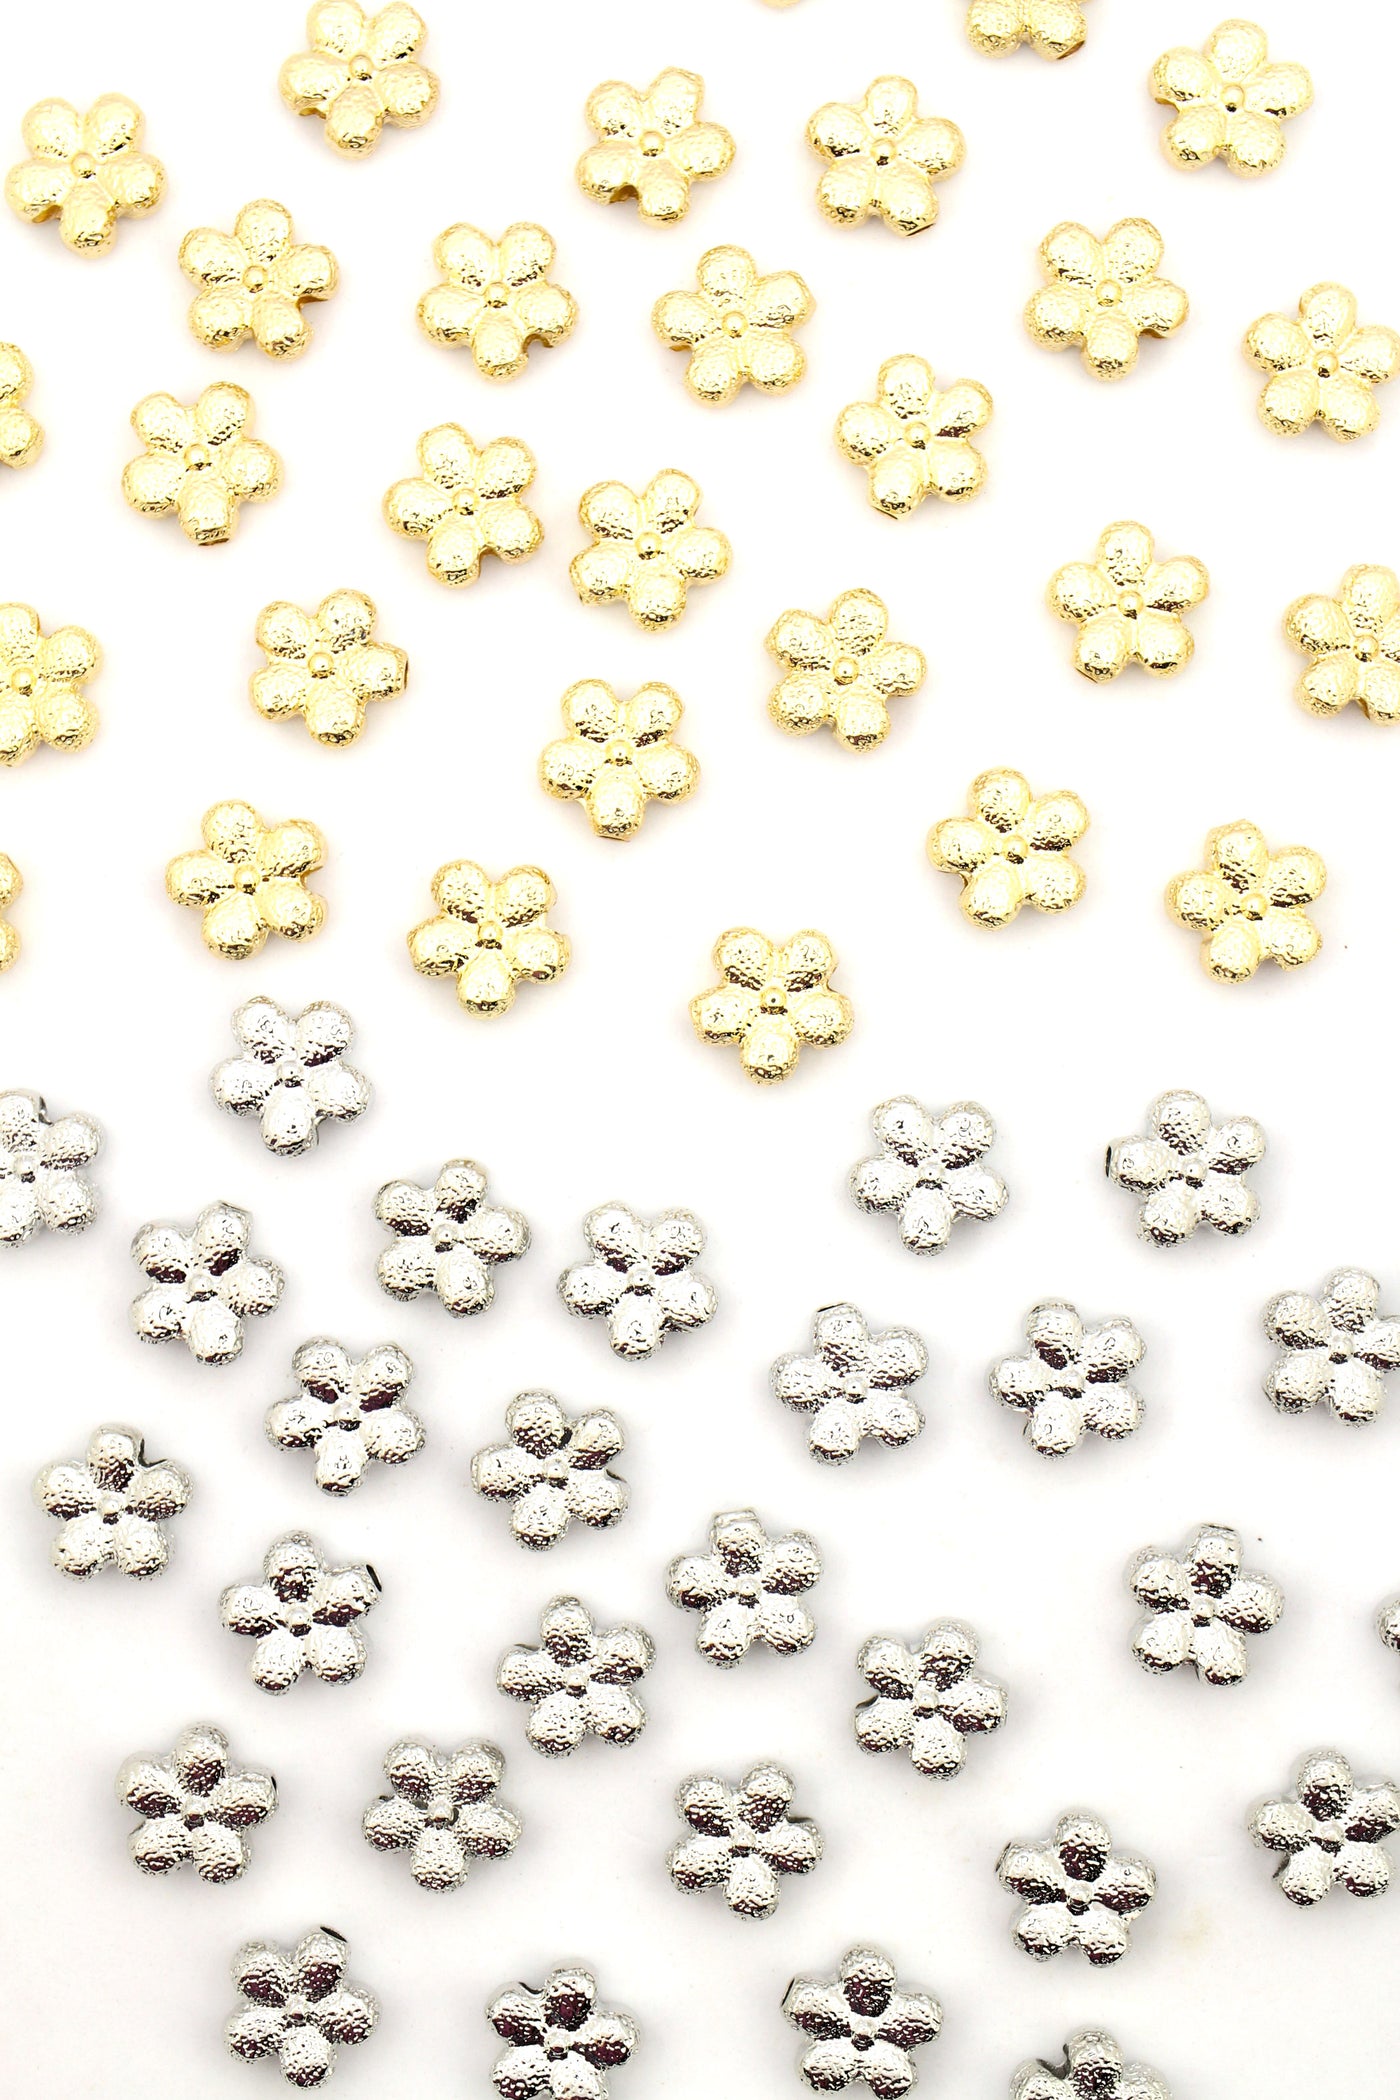 Italian Gold and Silver Flower Beads with large hole